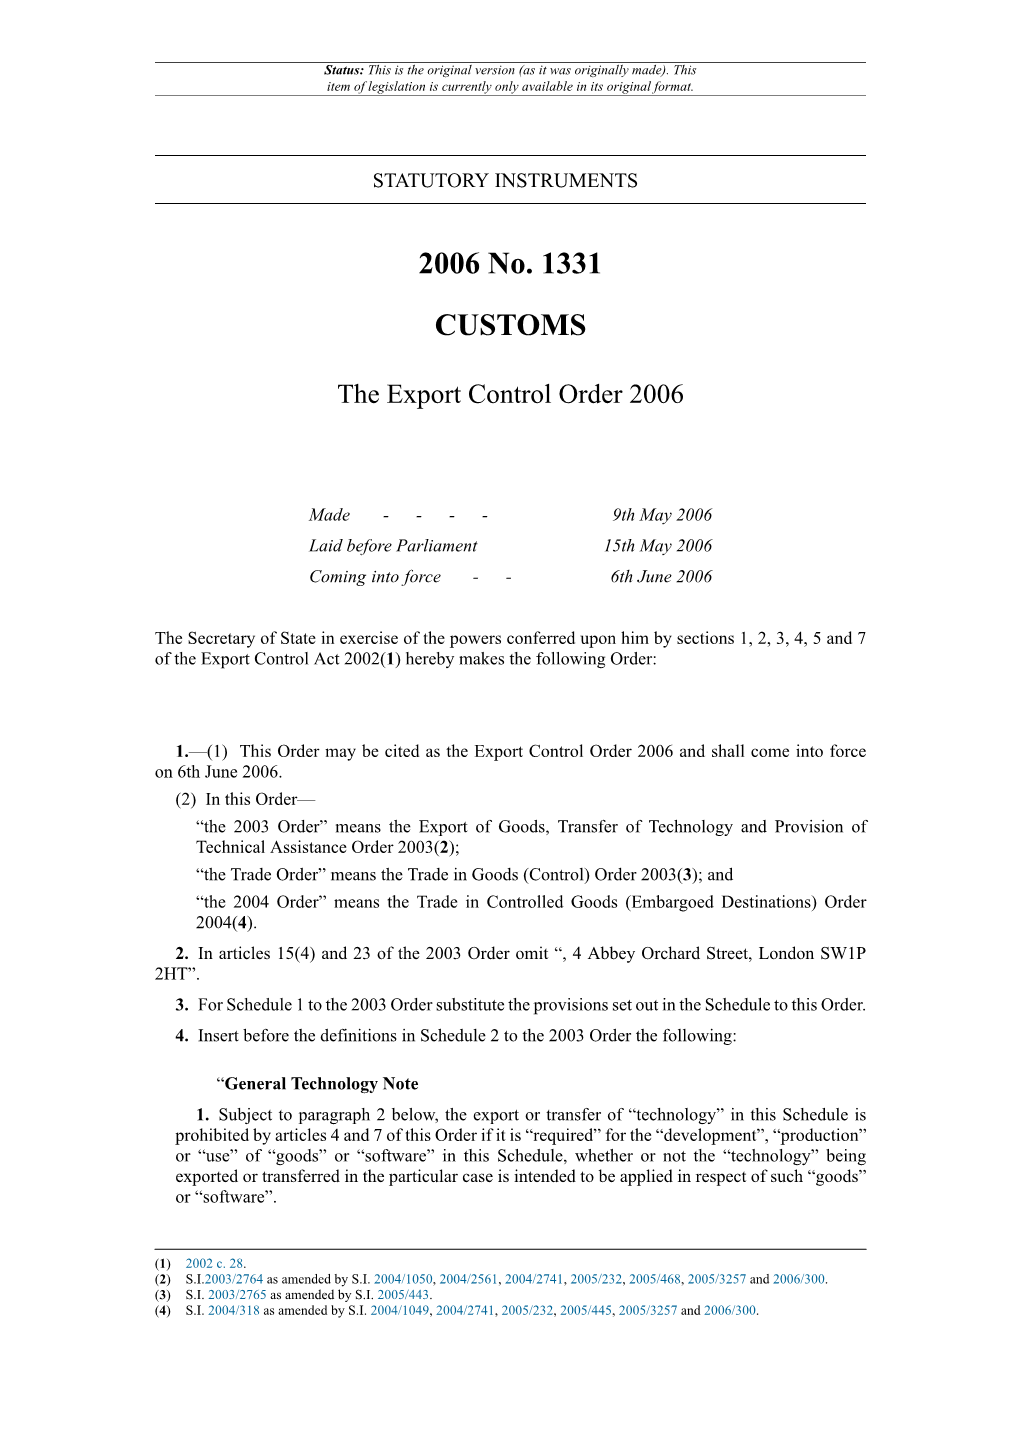 The Export Control Order 2006